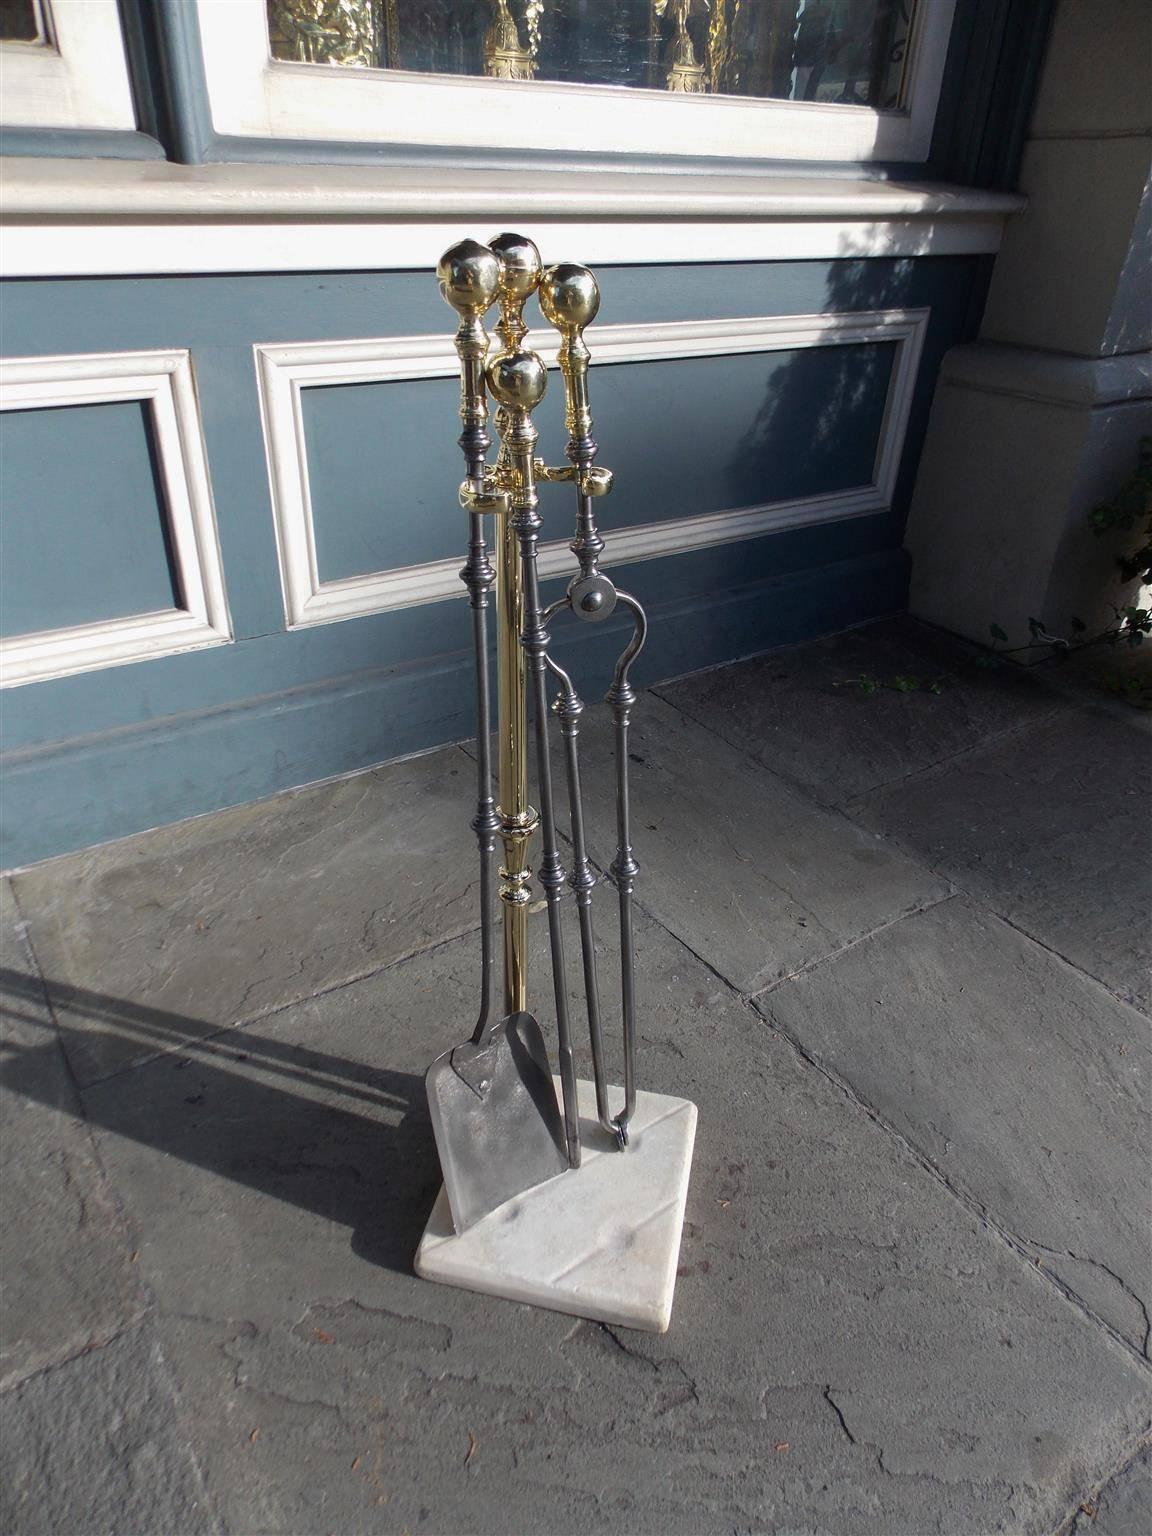 Set of American Colonial brass and polished steel fire tools with bulbous brass ball handles, a brass jamb hook and shaft, and terminating on marble squared base with round depressions and straight gouges. Set consist of shovel, tong and poker,